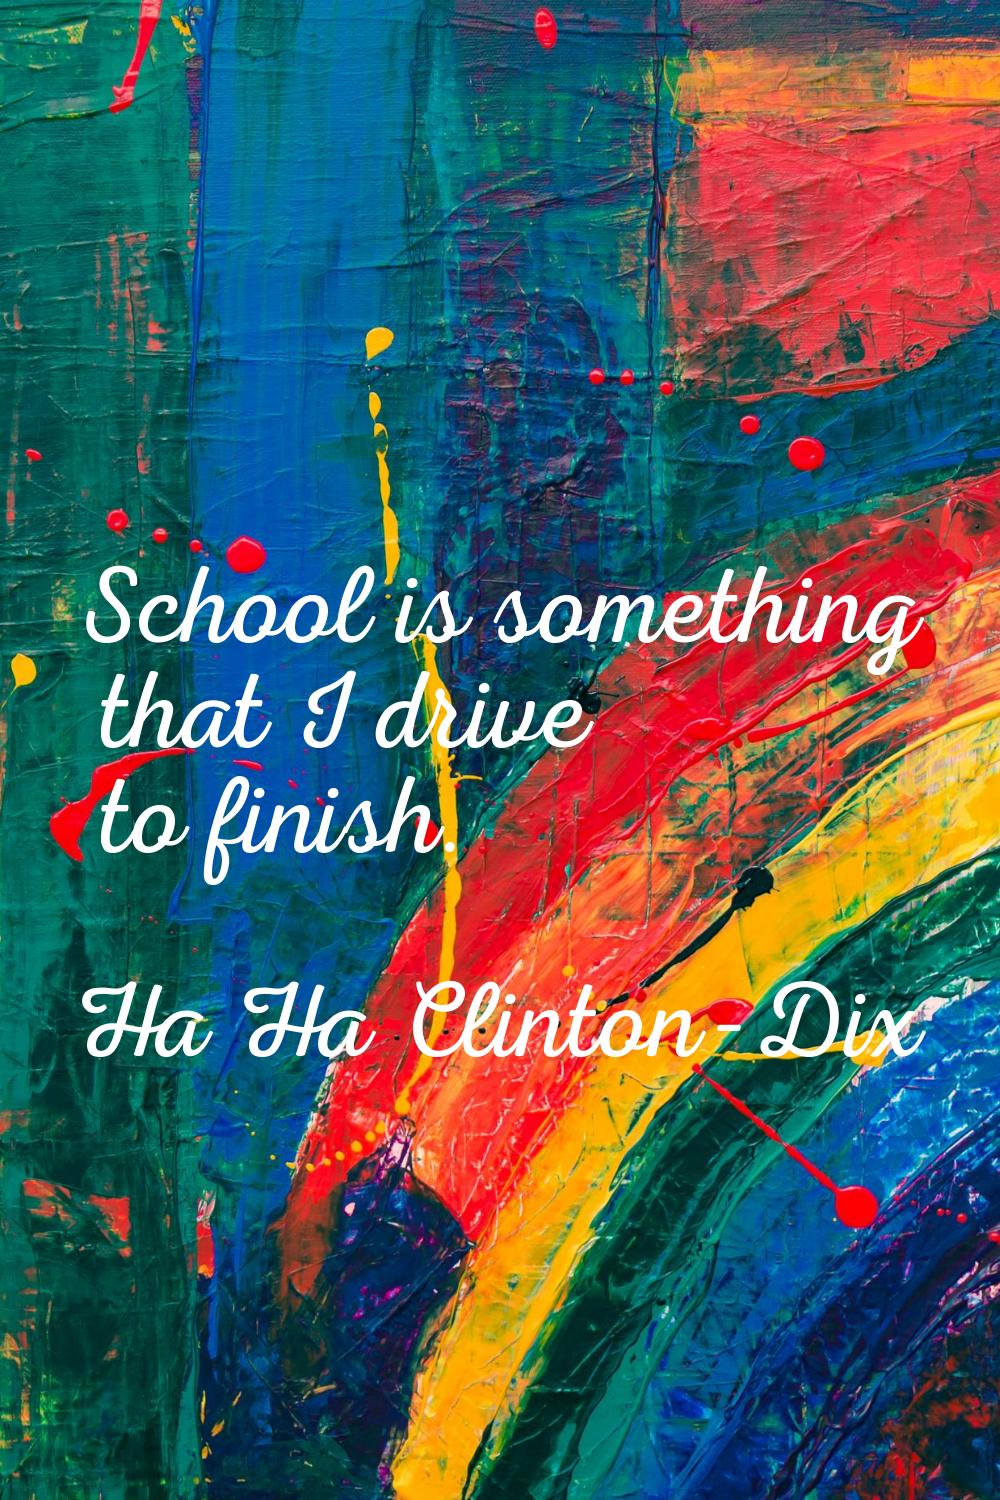 School is something that I drive to finish.